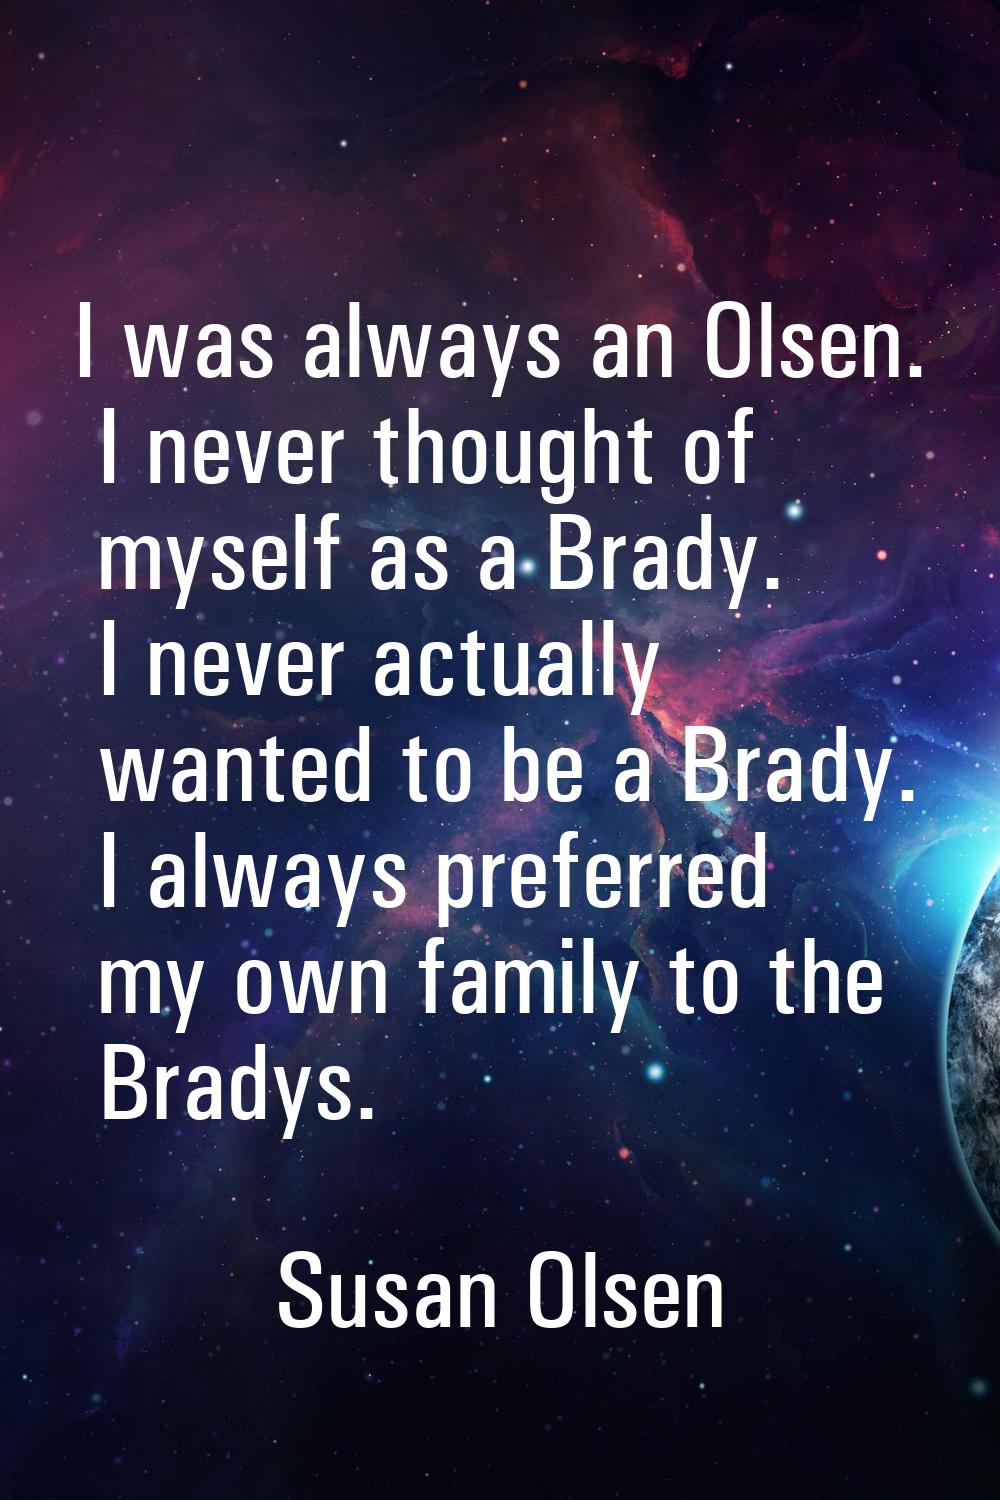 I was always an Olsen. I never thought of myself as a Brady. I never actually wanted to be a Brady.